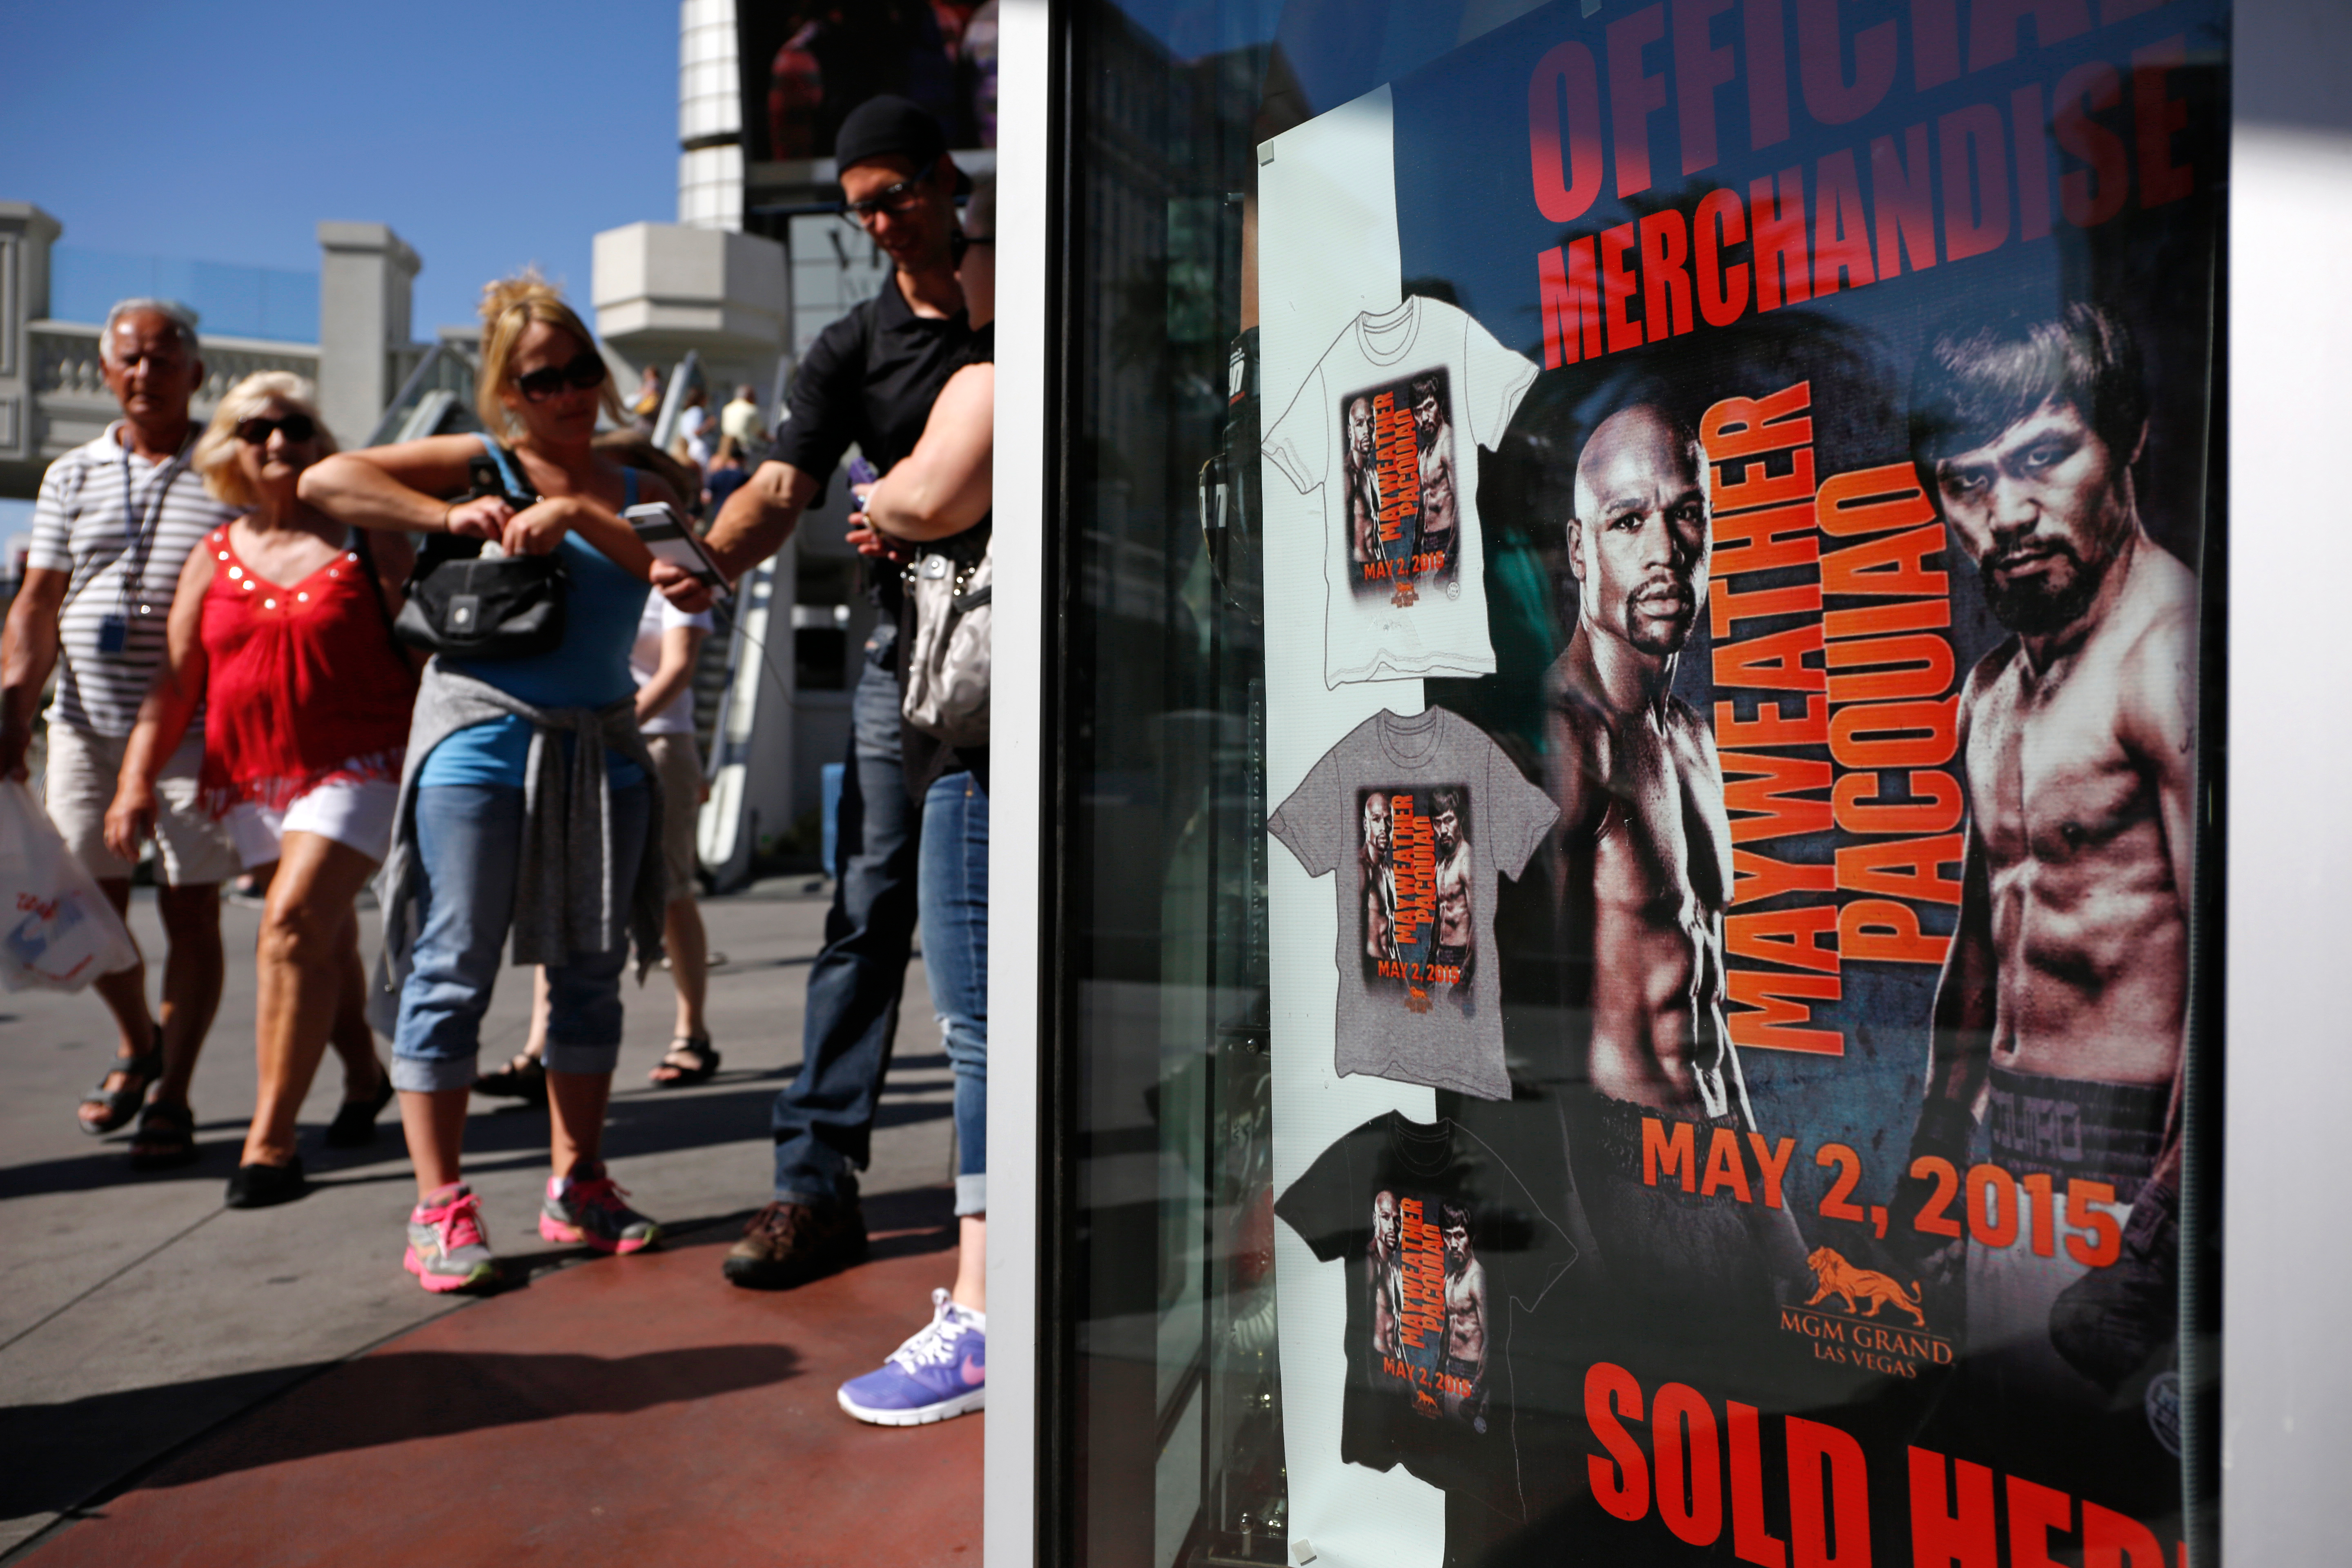 The Mayweather-Pacquiao fight is packing Las Vegas on what already is usually a huge gambling weekend. Lots of businesses are predicting record hauls, including secondary ticket sellers, hotel companies, casinos, restaurants, bars, and the state's legal brothels.